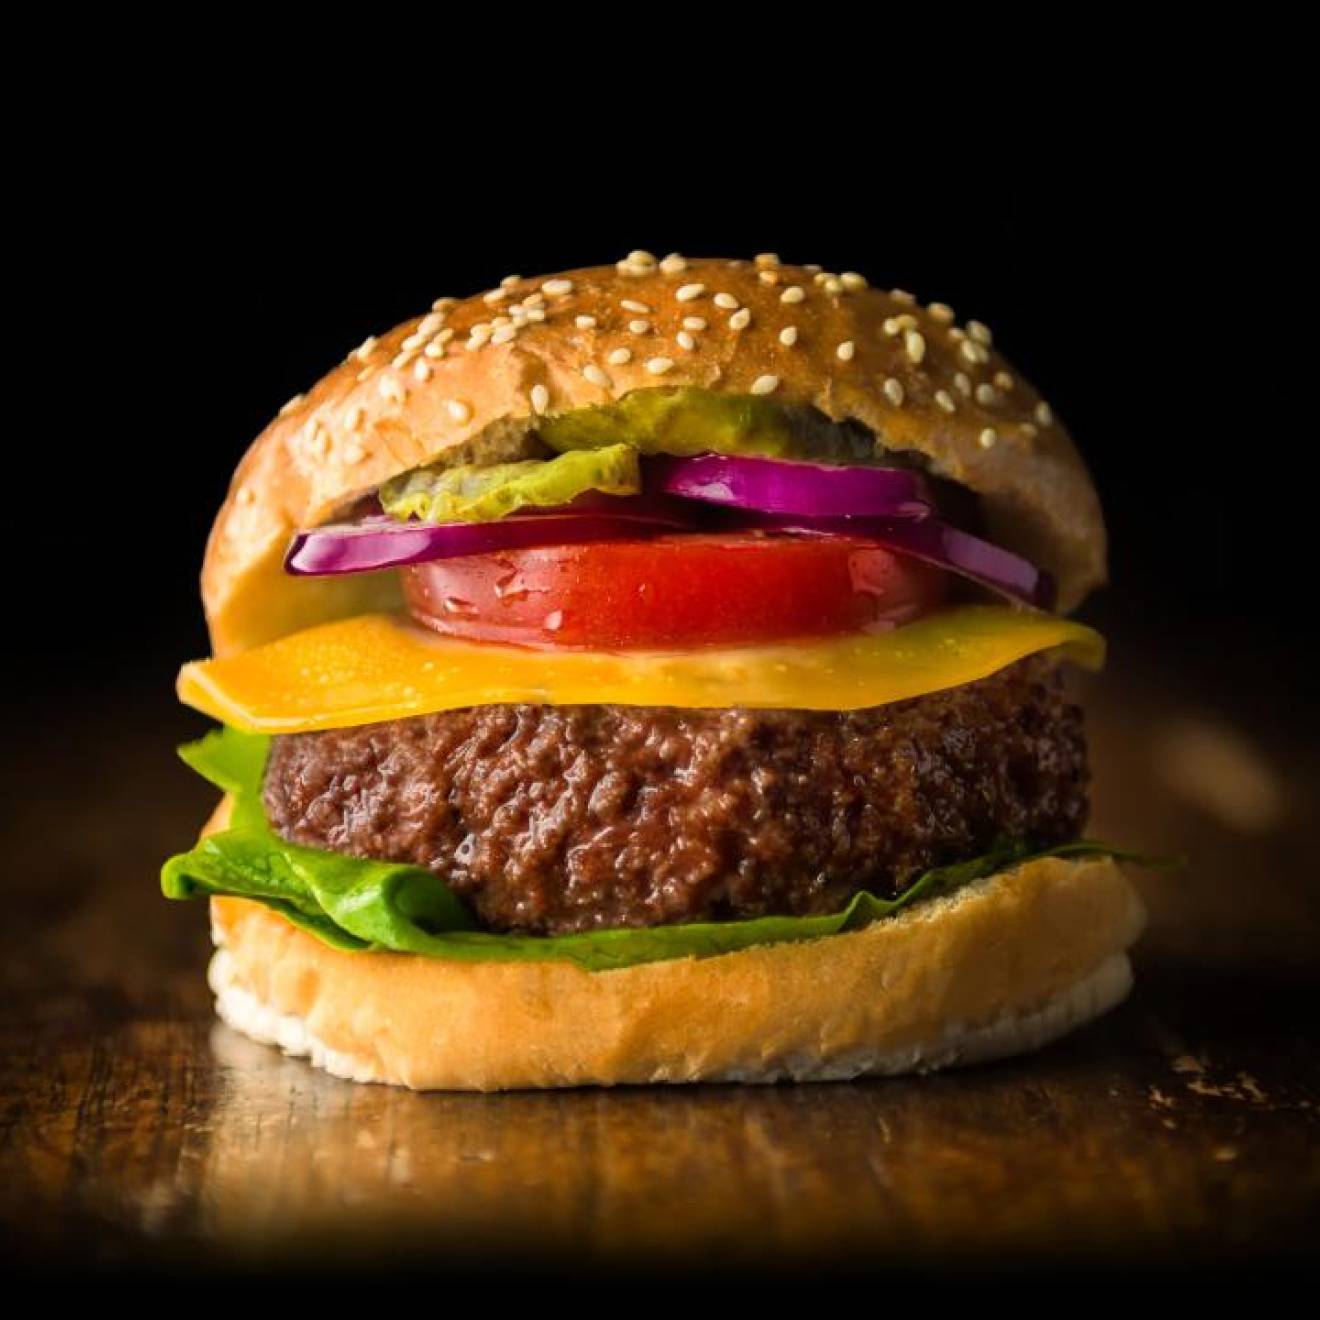 A burger made of lab-grown meat